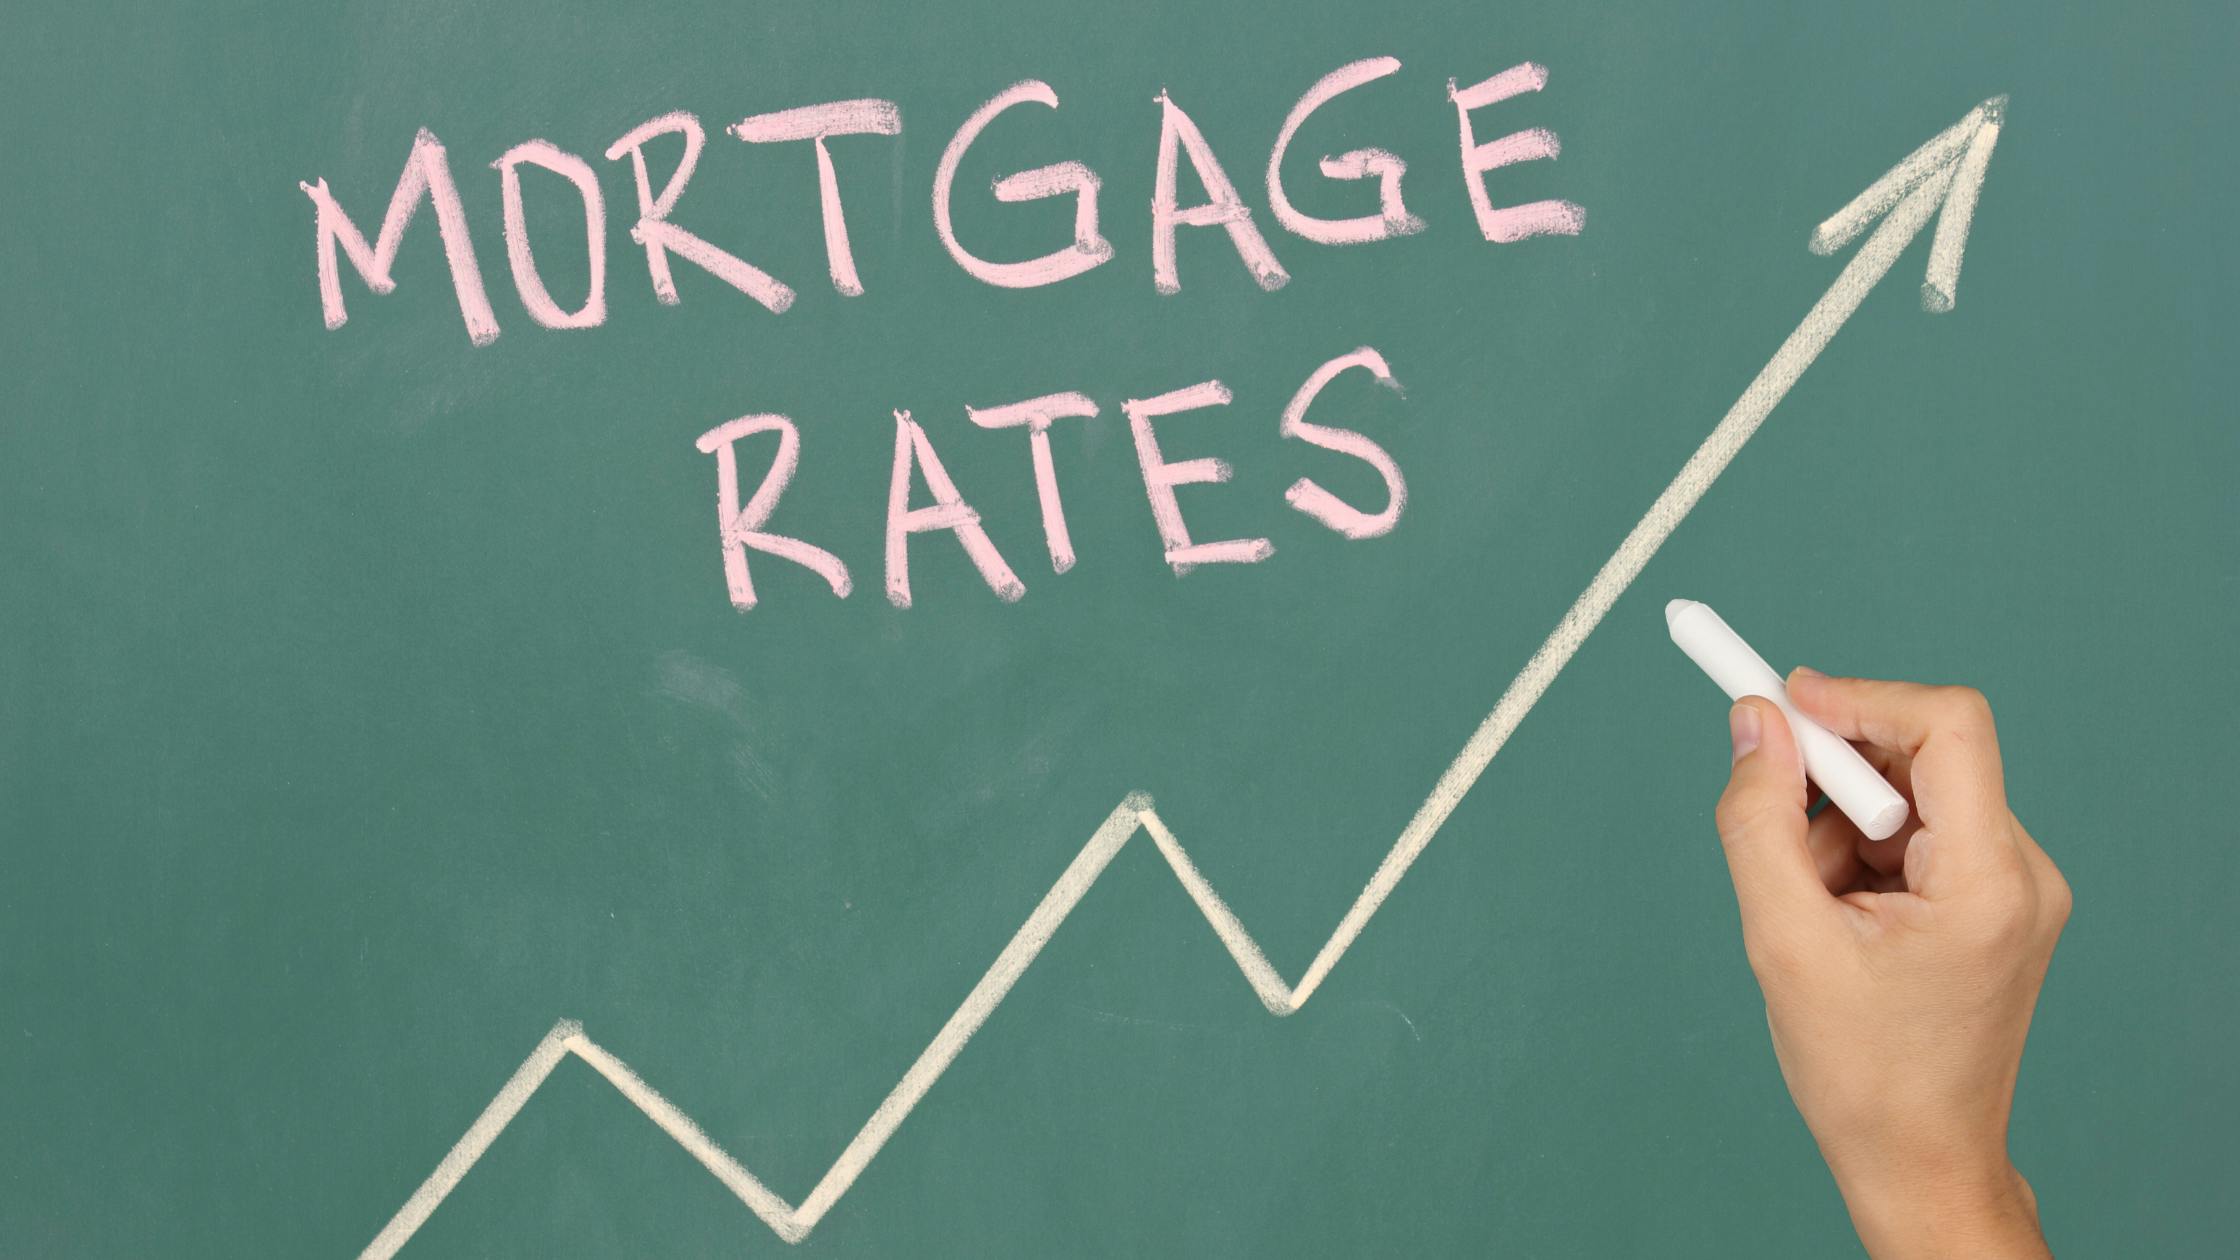 Can you get a mortgage for 5 or 6 times your salary?